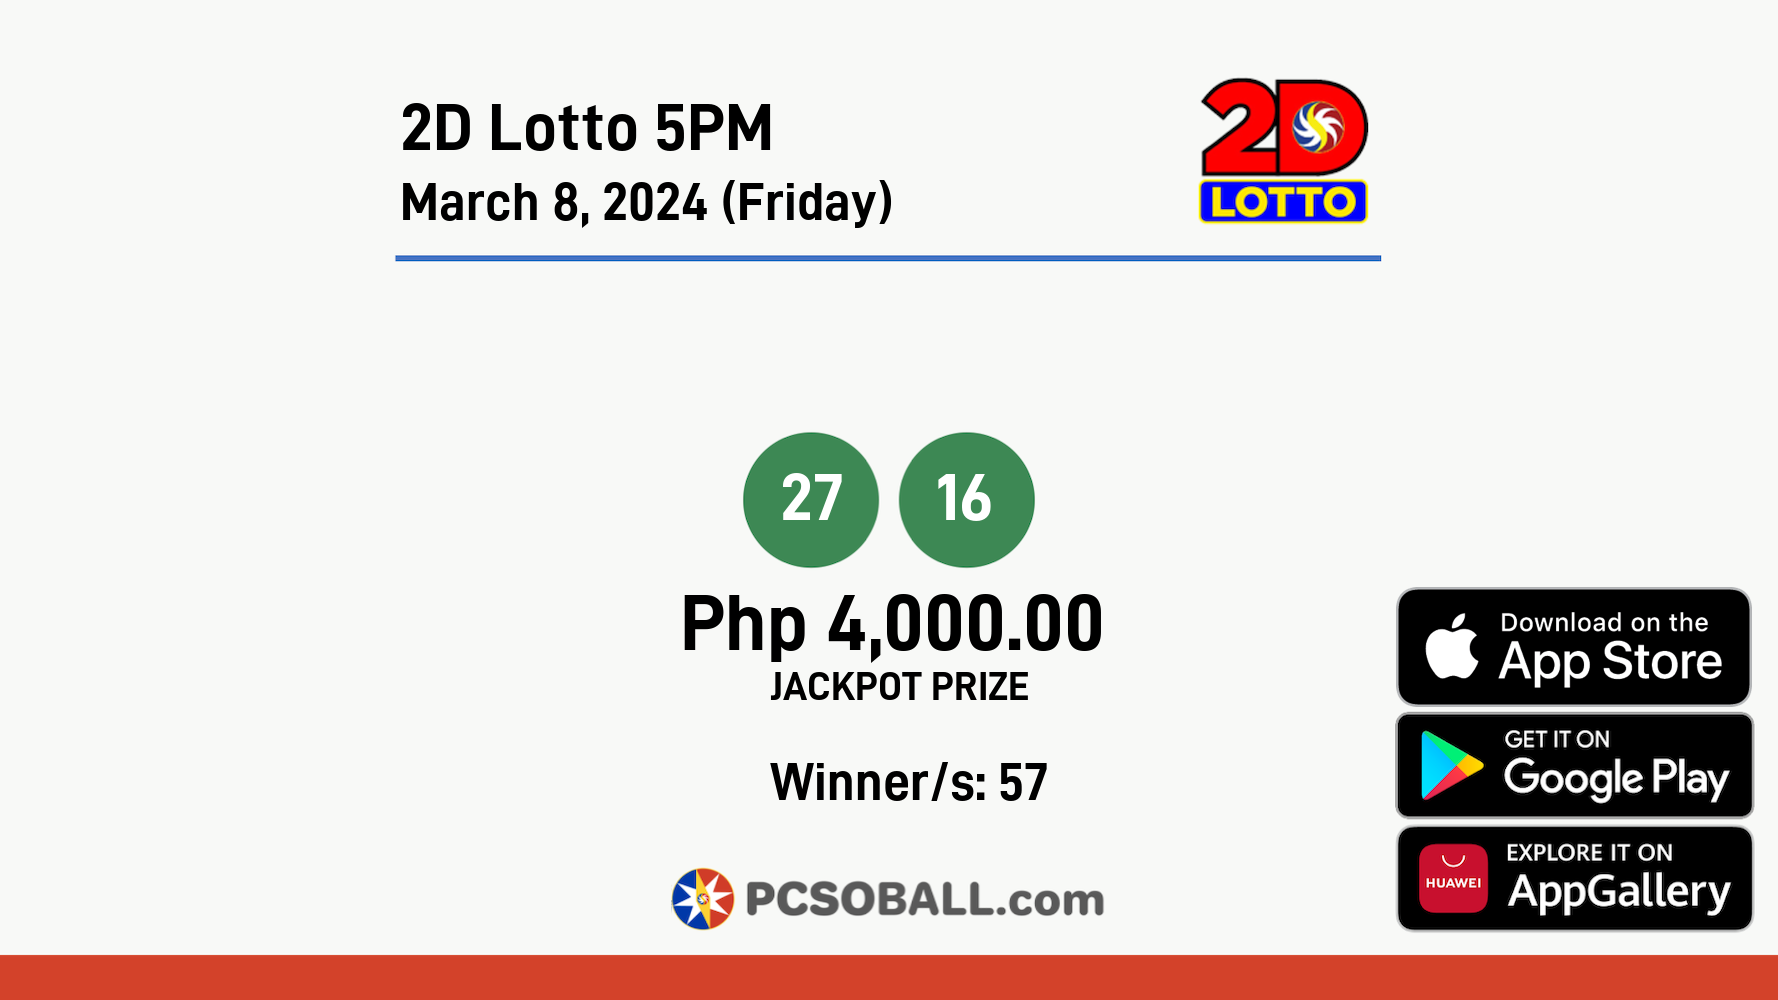 2D Lotto 5PM March 8, 2024 (Friday) Result